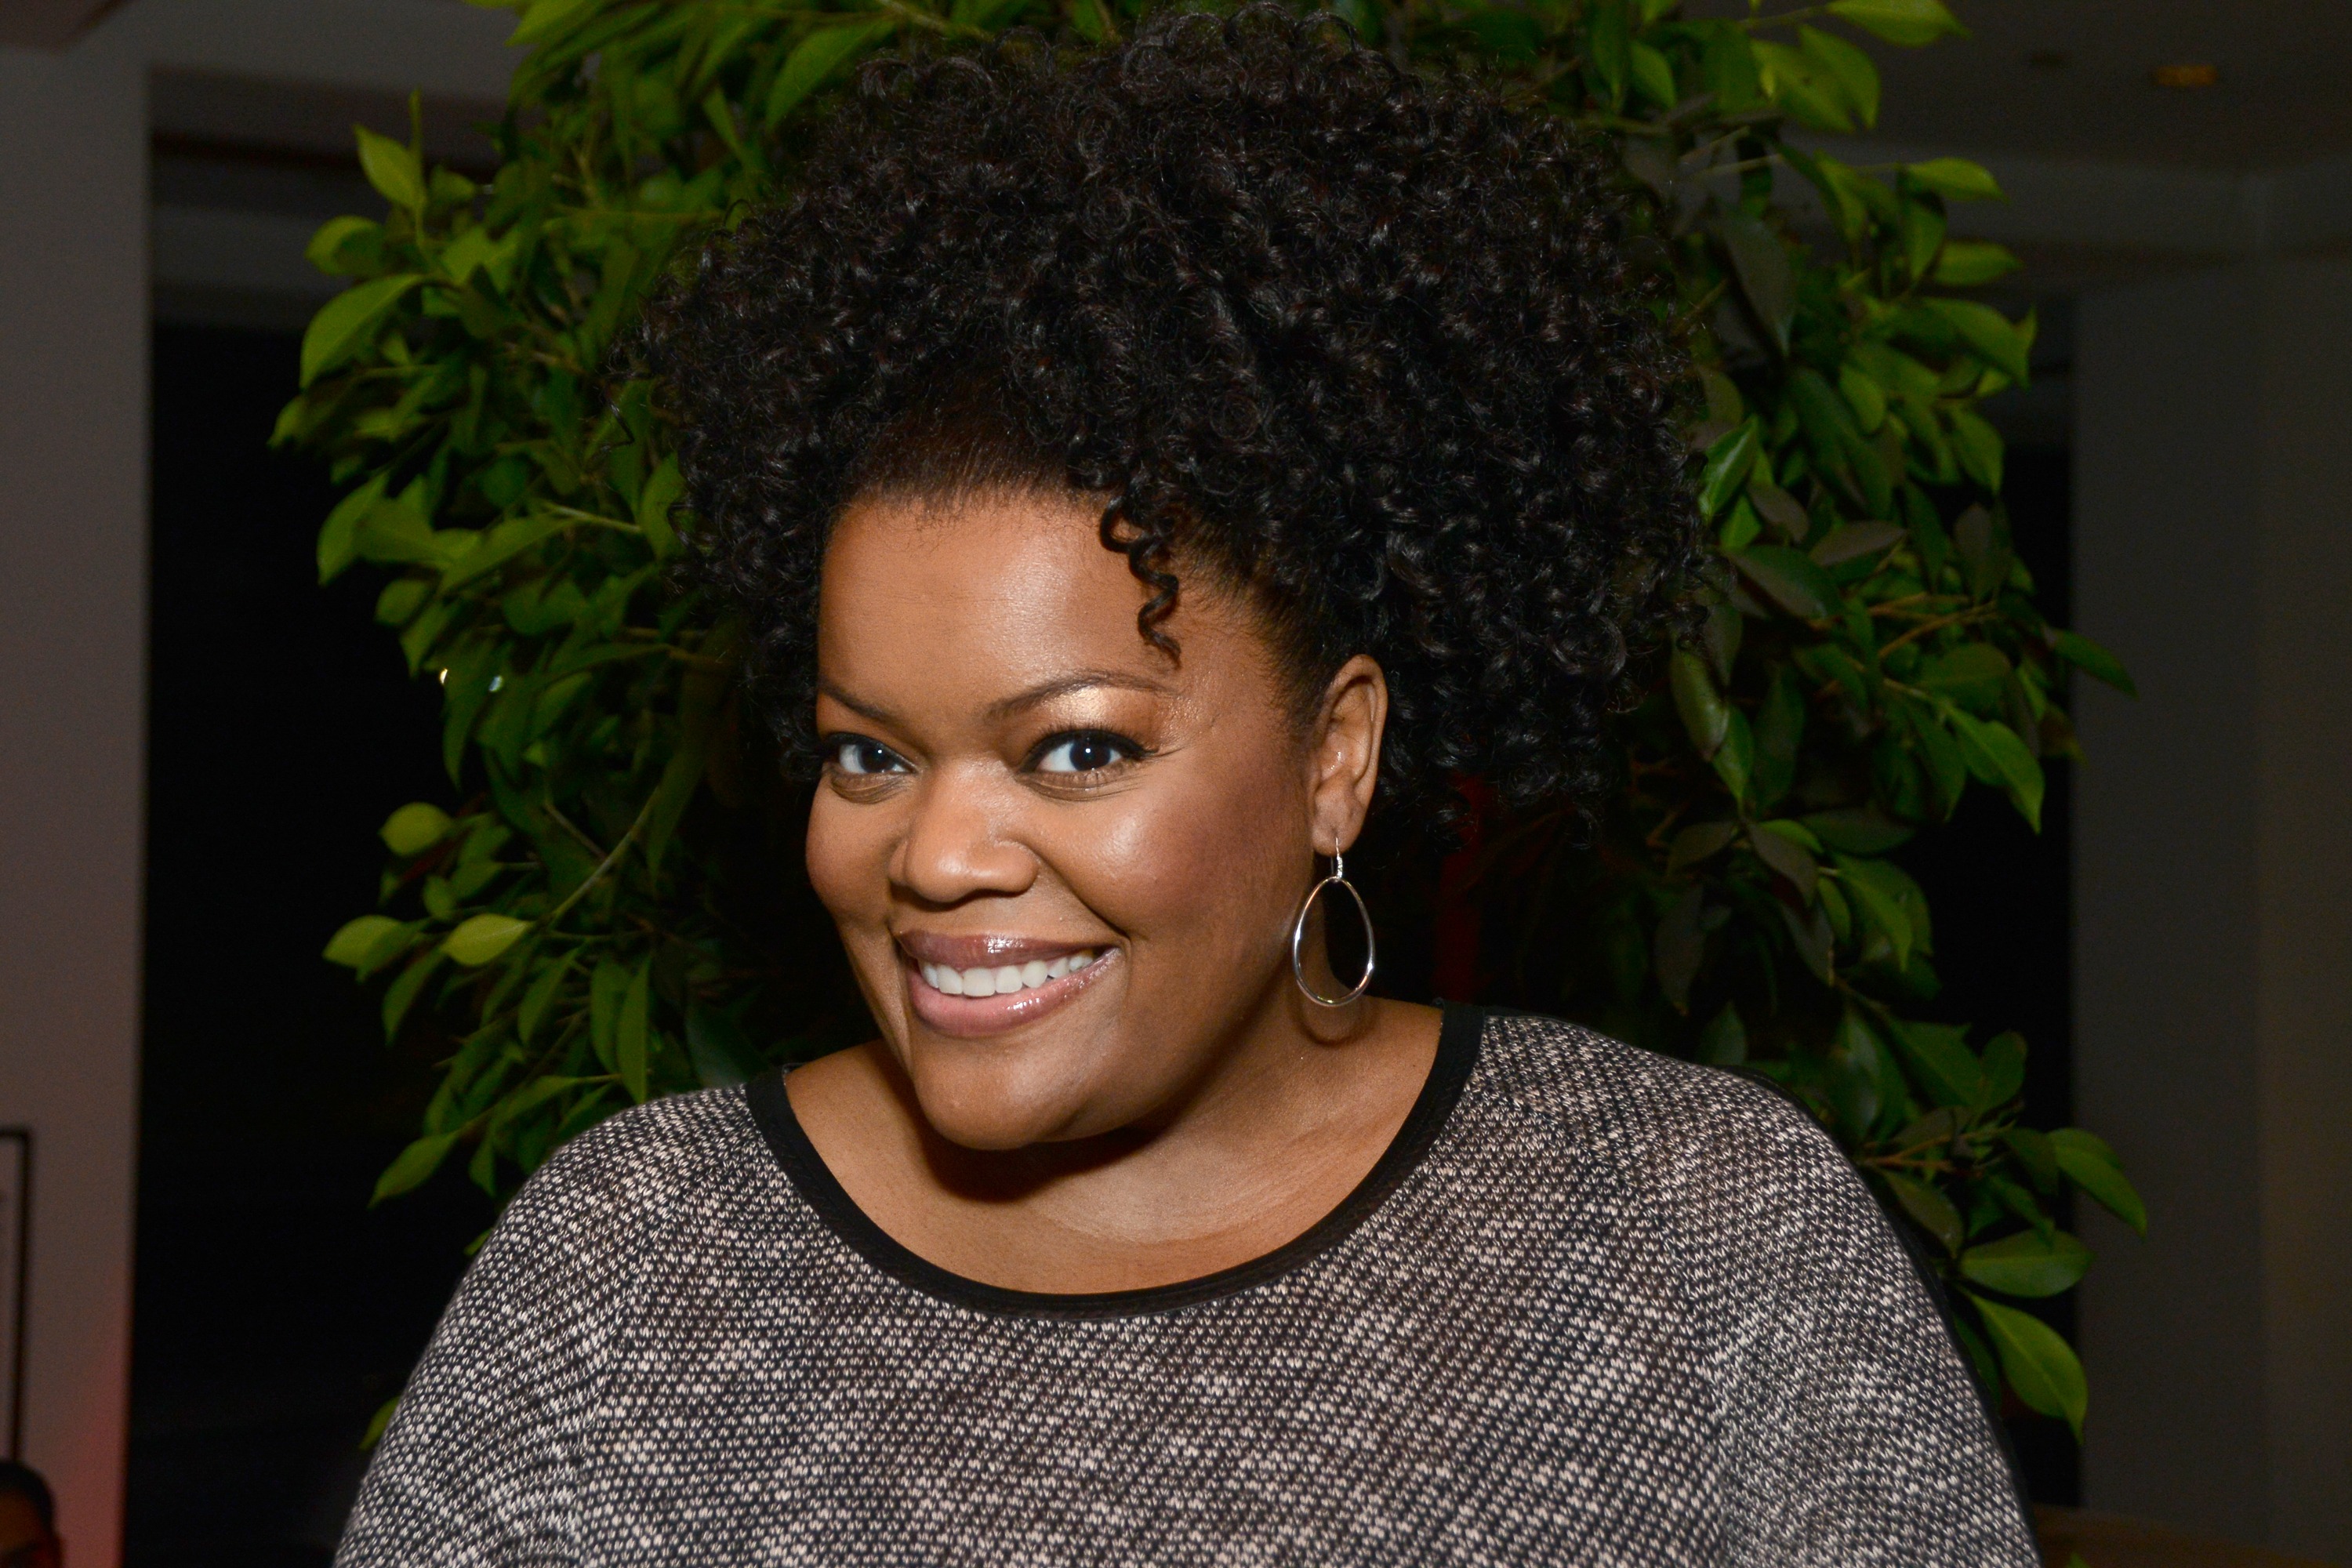 Television fanatic and star Yvette Nicole Brown is about to get the joy of ...